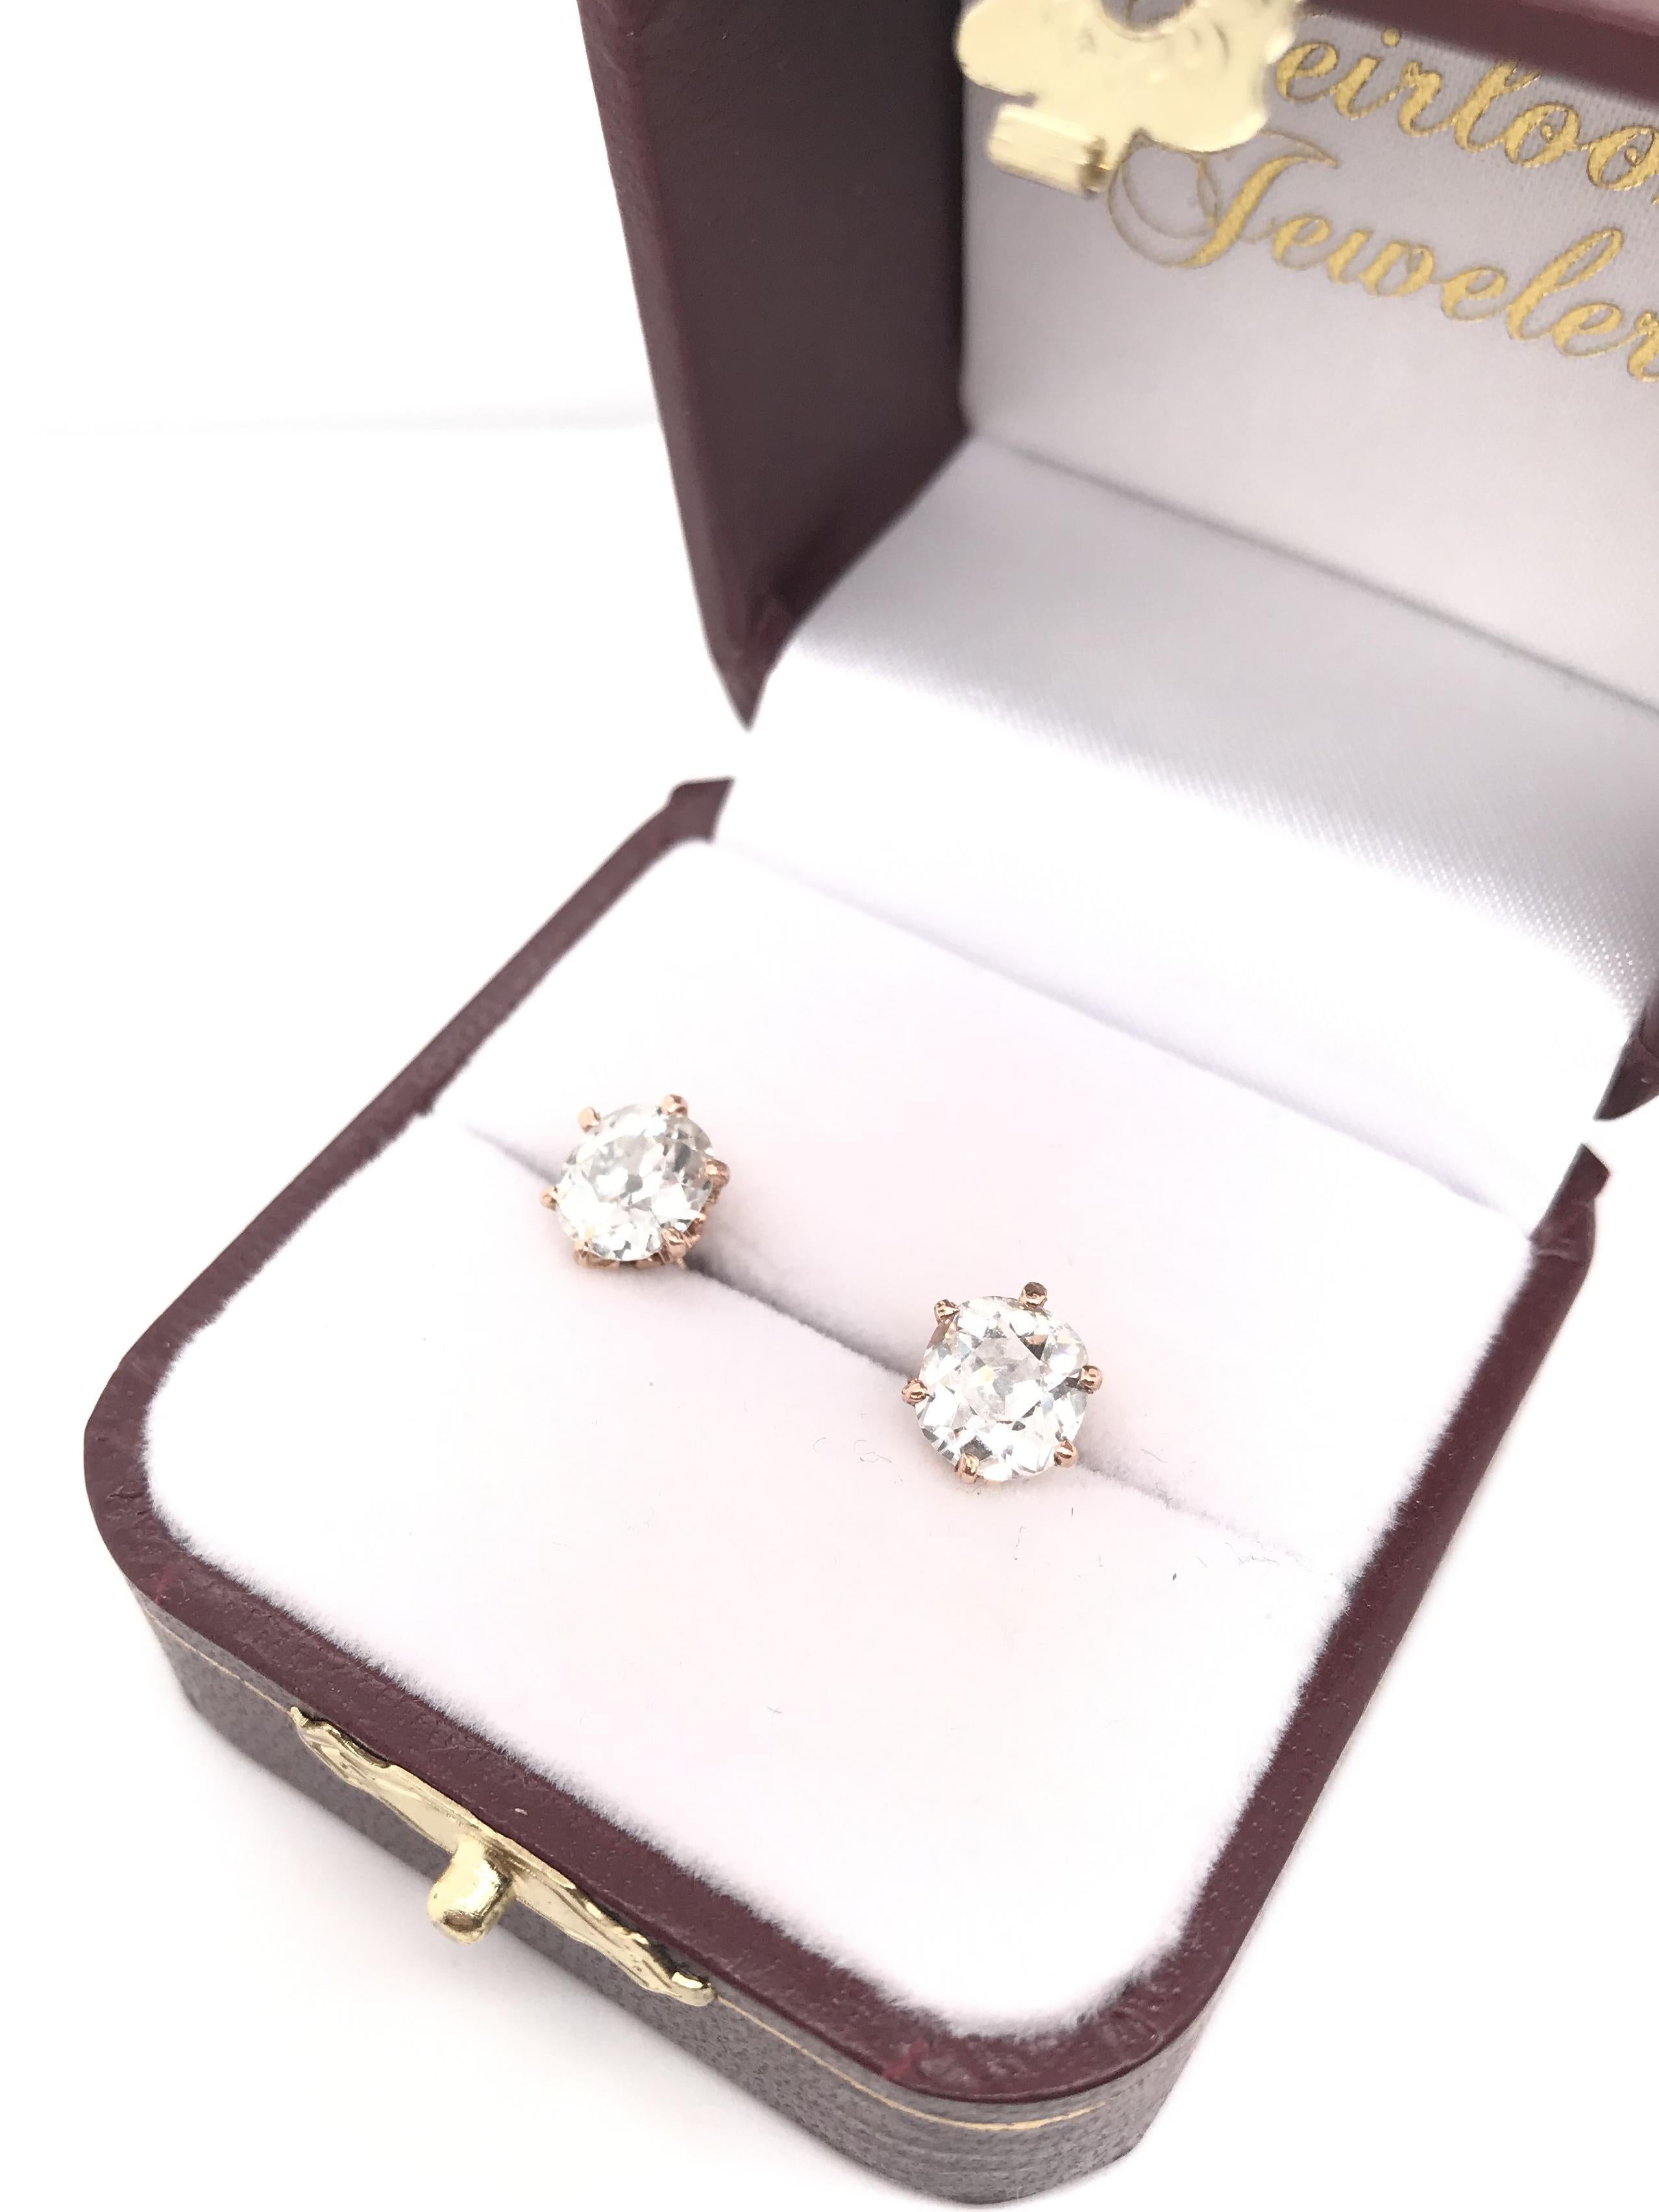 These antique diamond earrings were crafted sometime during the Victorian design period (1840-1900). The diamonds are Old Mine cut, measuring approximately 1.30 carats and 1.29 carats. They have a combined total diamond weight of approximately 2.59